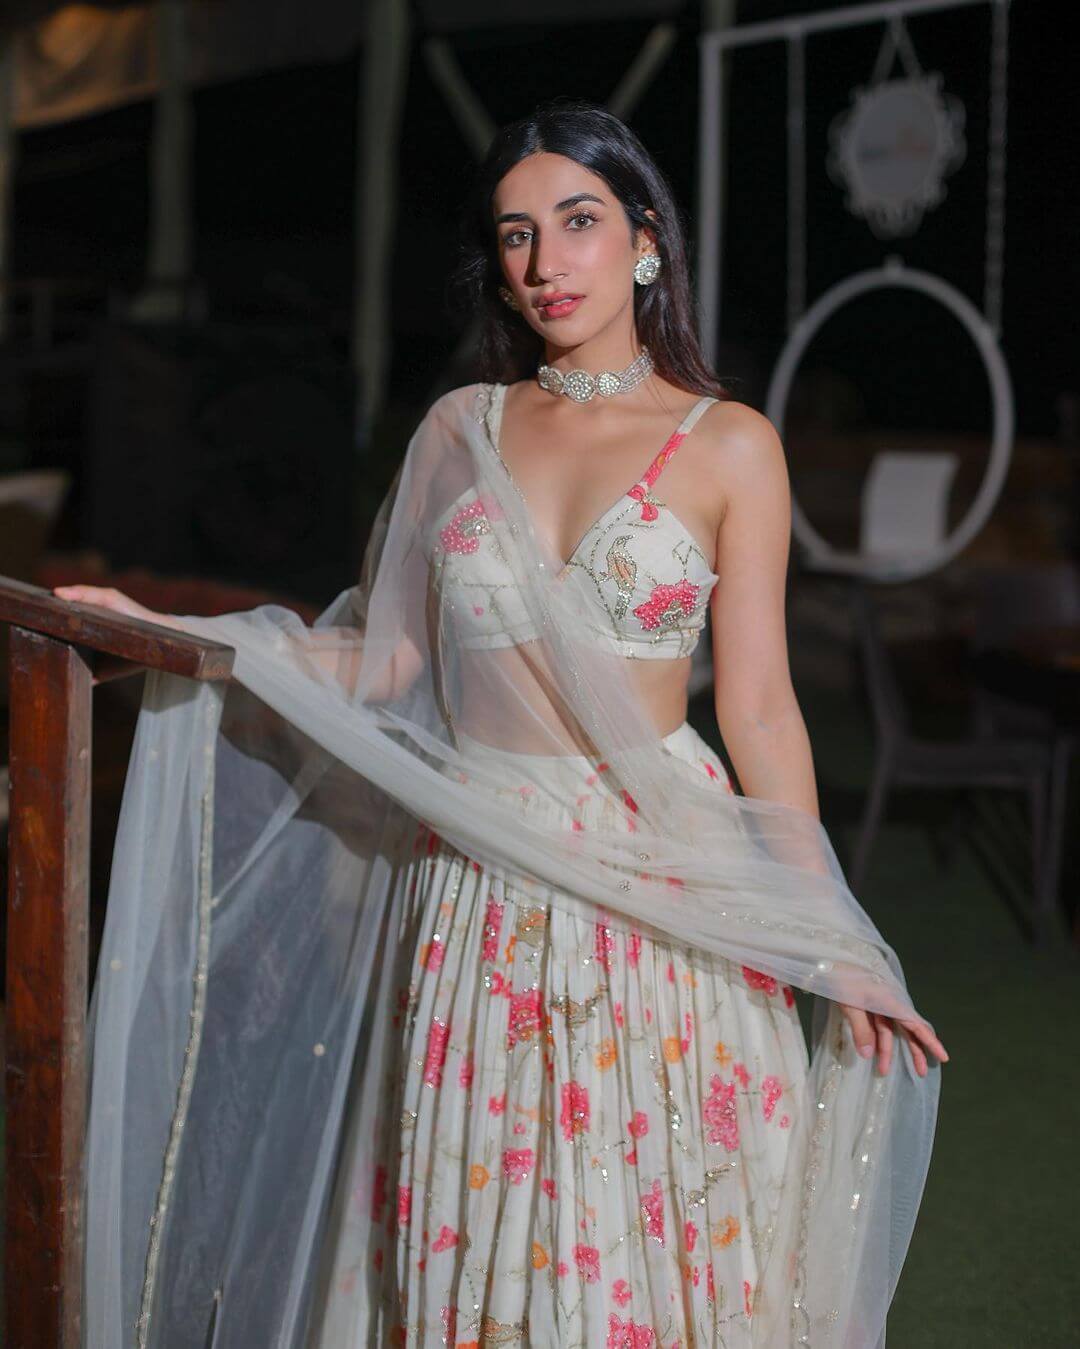 Parul Gulati Look Gorgeous In White Single Strip Blouse And Lehenga Outfit